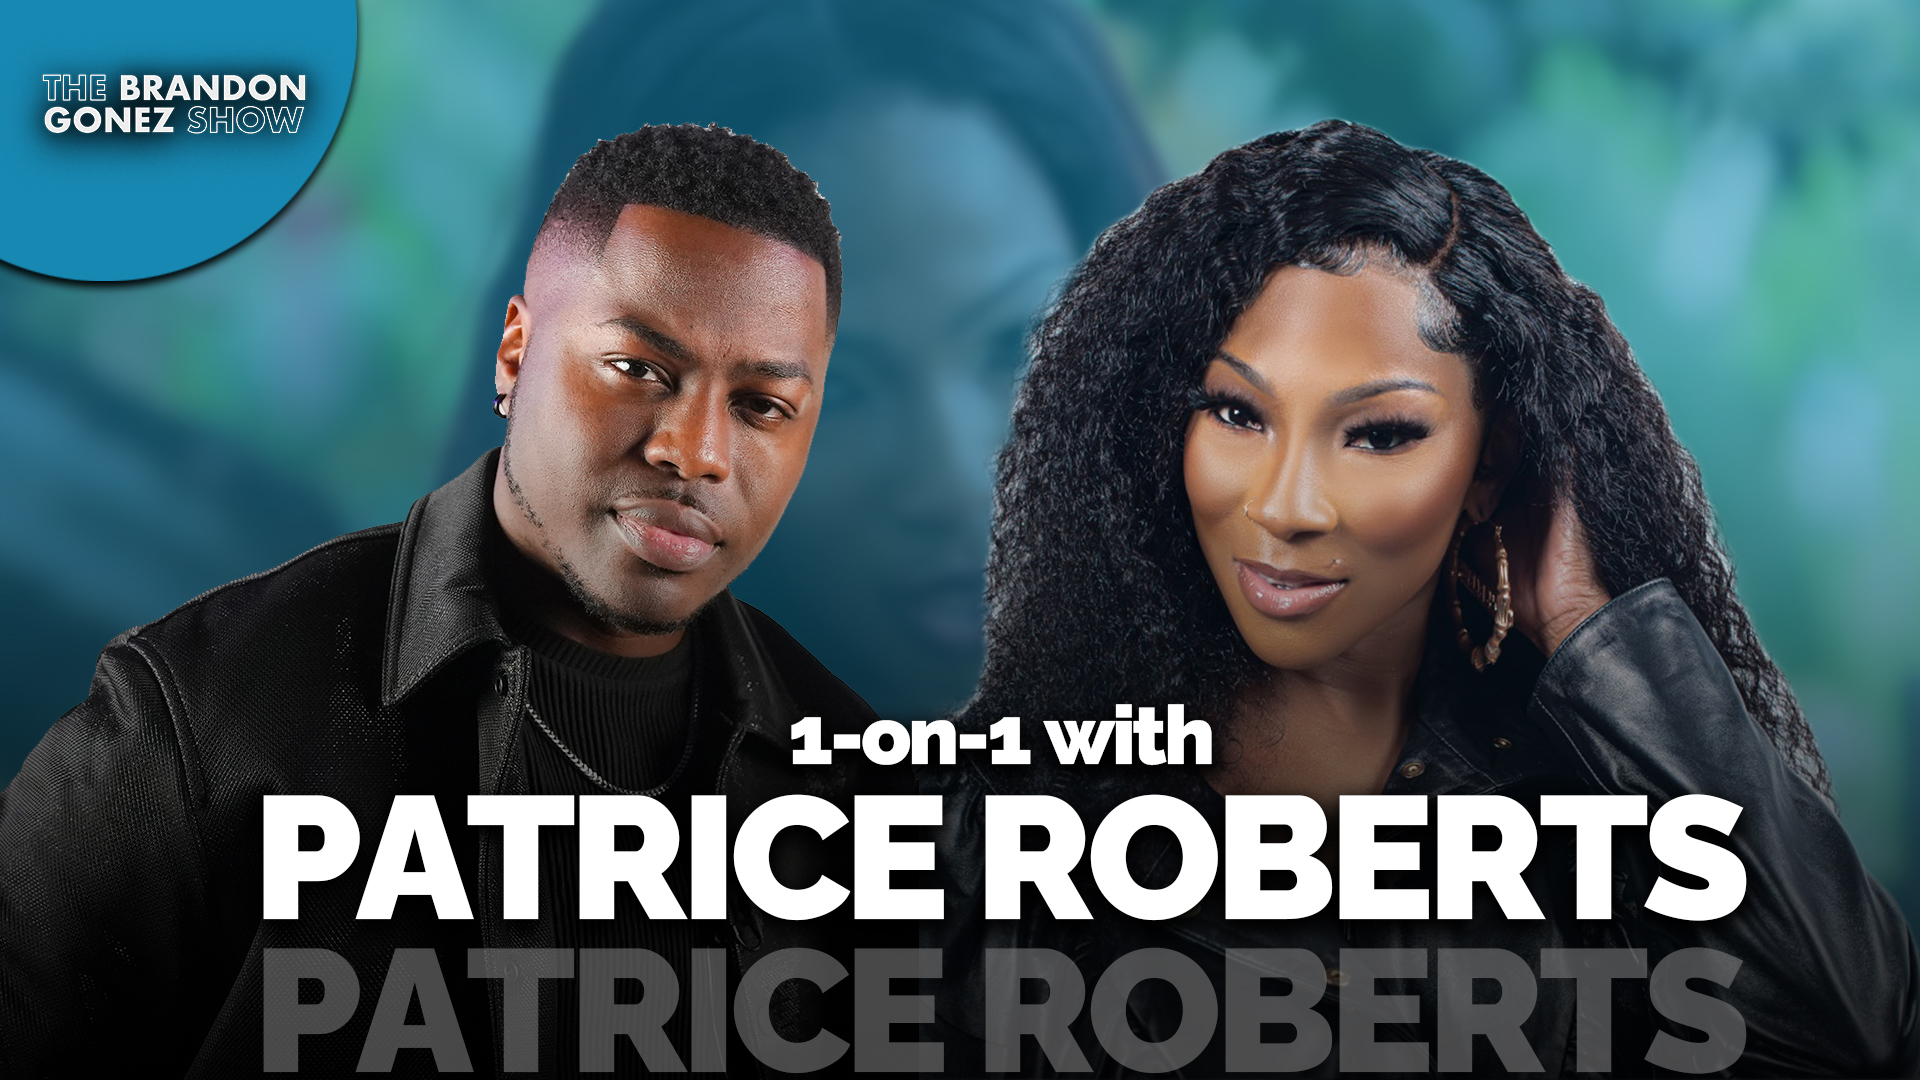 1-on-1 with Soca Superstar Patrice Roberts